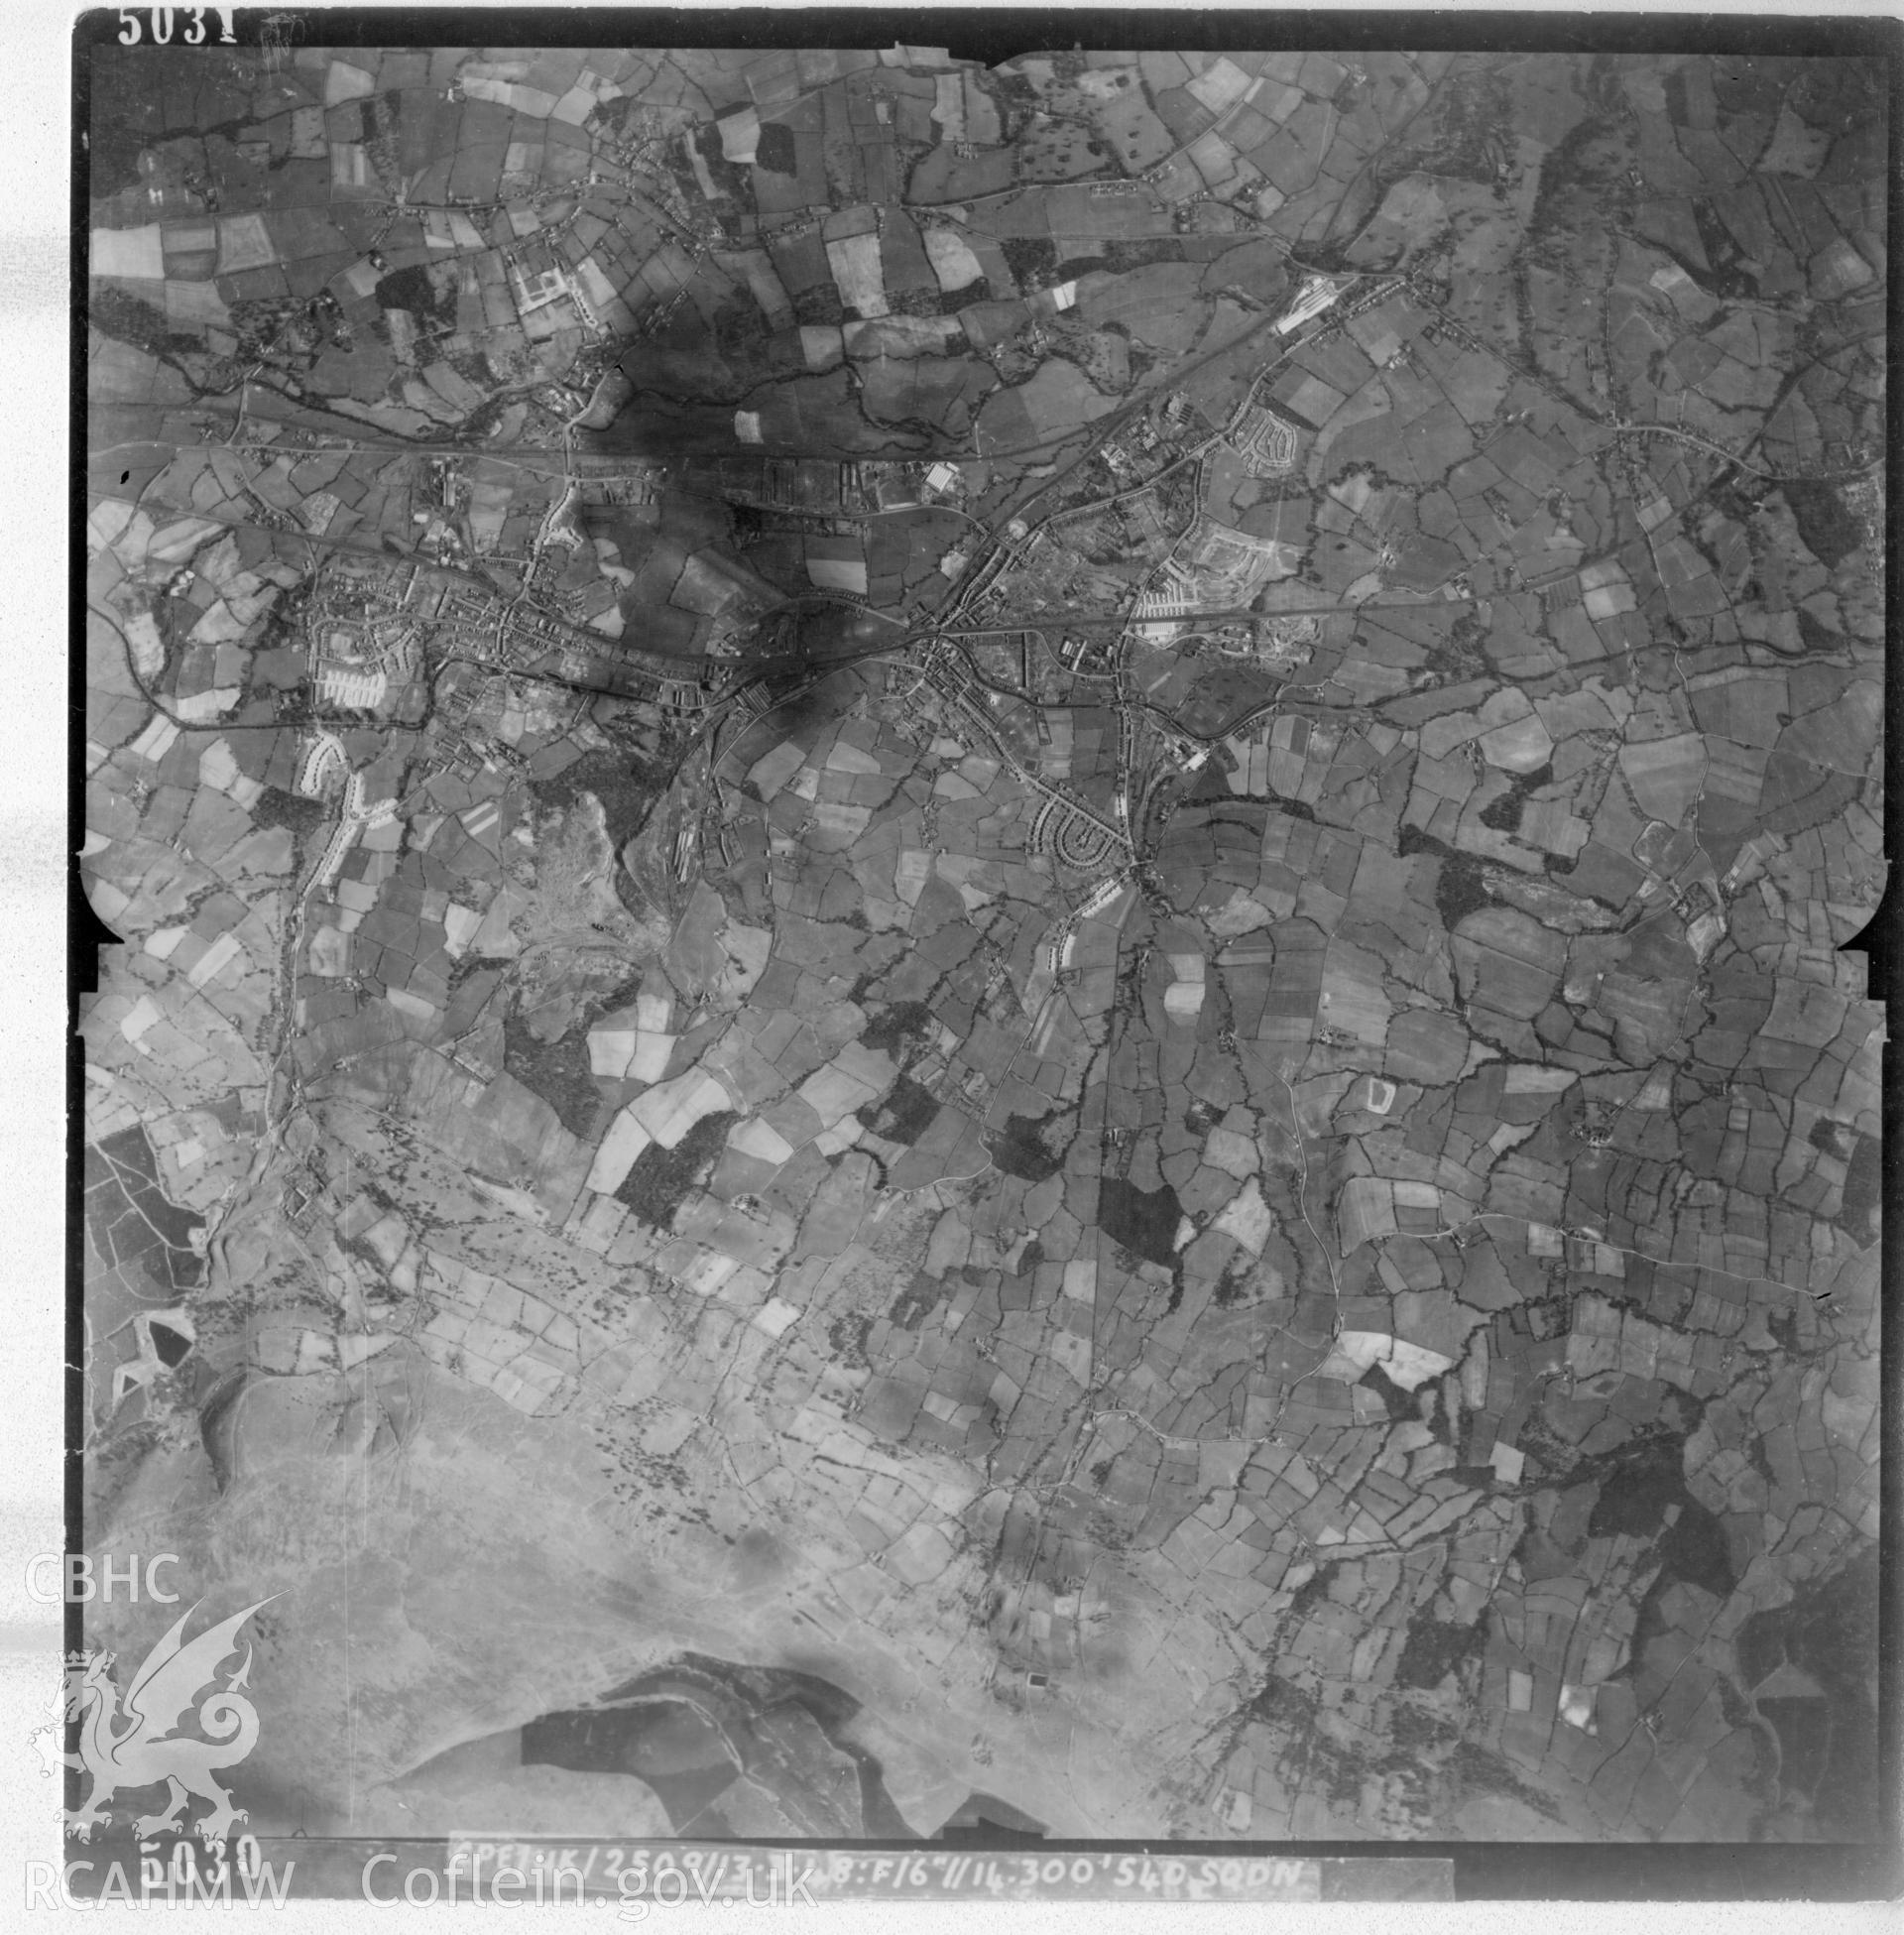 Aerial photograph of Cwmbran, taken on 13th March 1948. Included as part of Archaeology Wales' desk based assessment of former Llantarnam Community Primary School, Croeswen, Oakfield, Cwmbran, conducted in 2017.